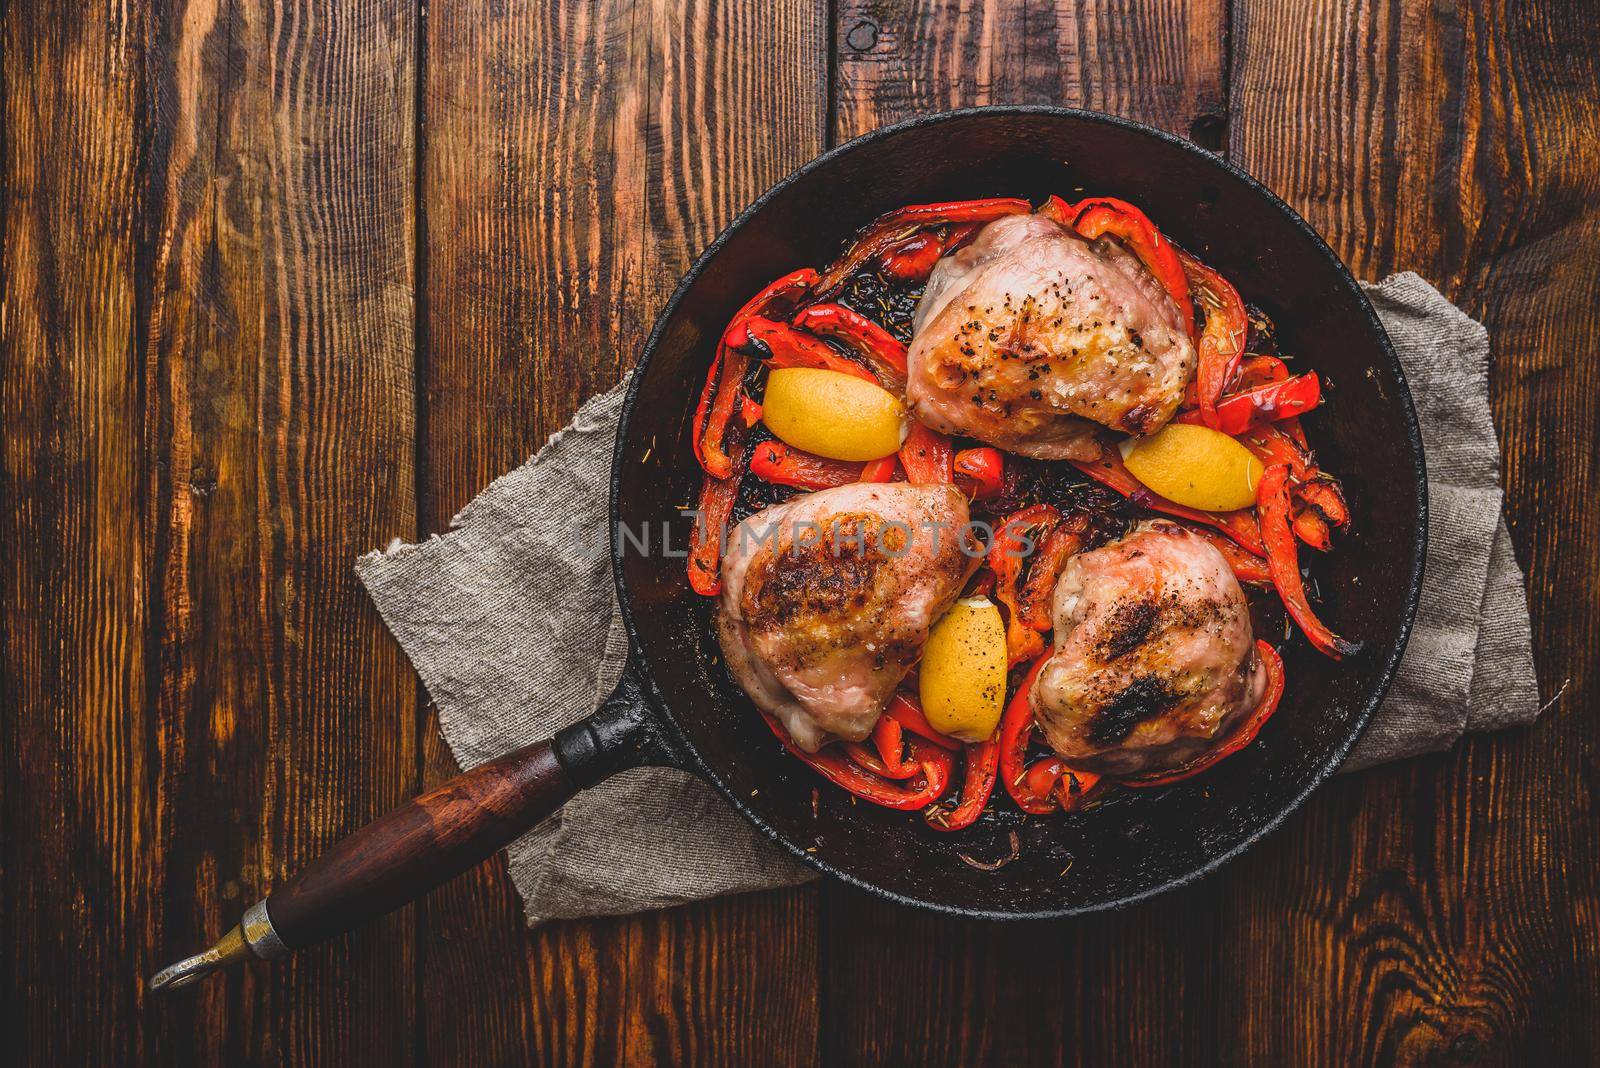 Chicken thighs with red bell peppers and lemon by Seva_blsv